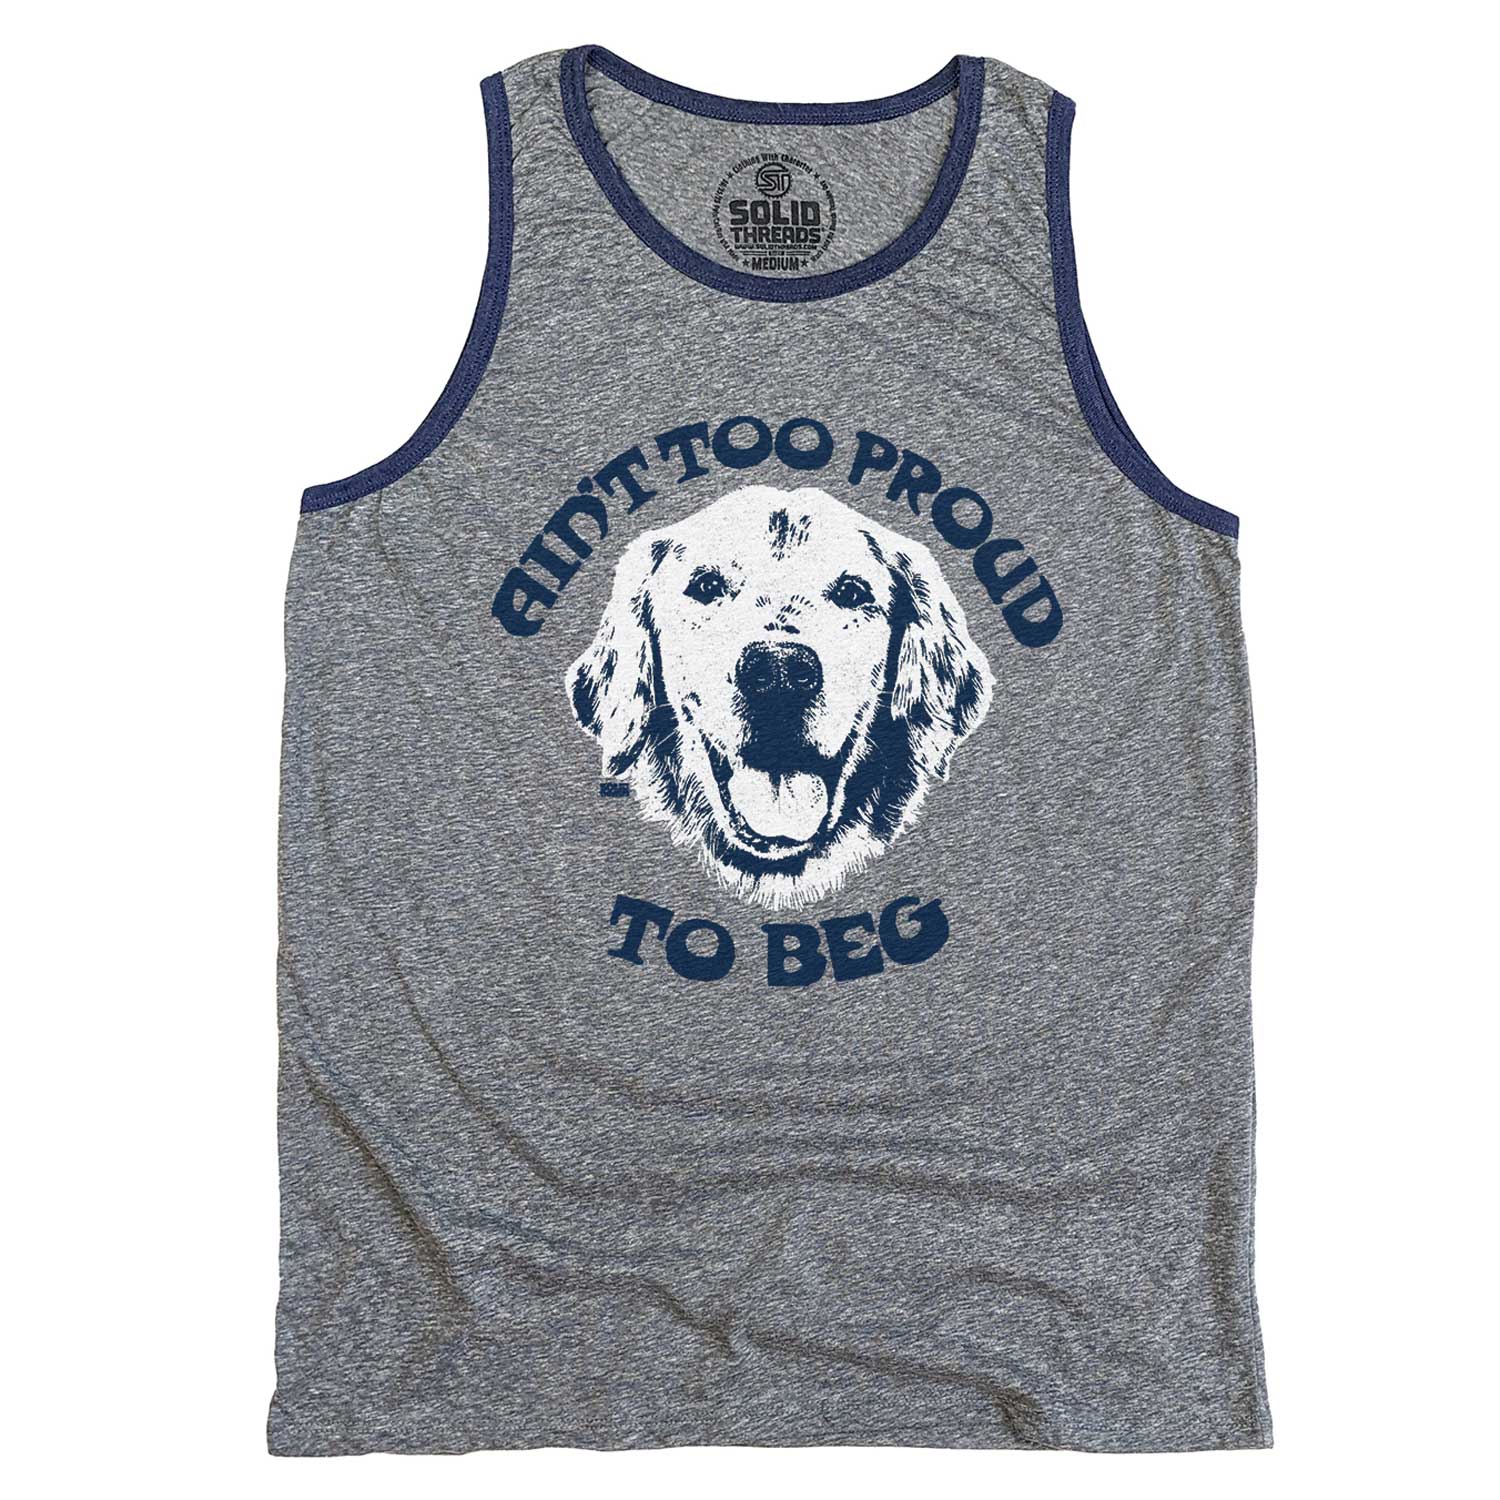 Men's Ain't Too Proud to Beg Cool Graphic Tank Top | Funny Dog Sleeveless Shirt | Solid Threads